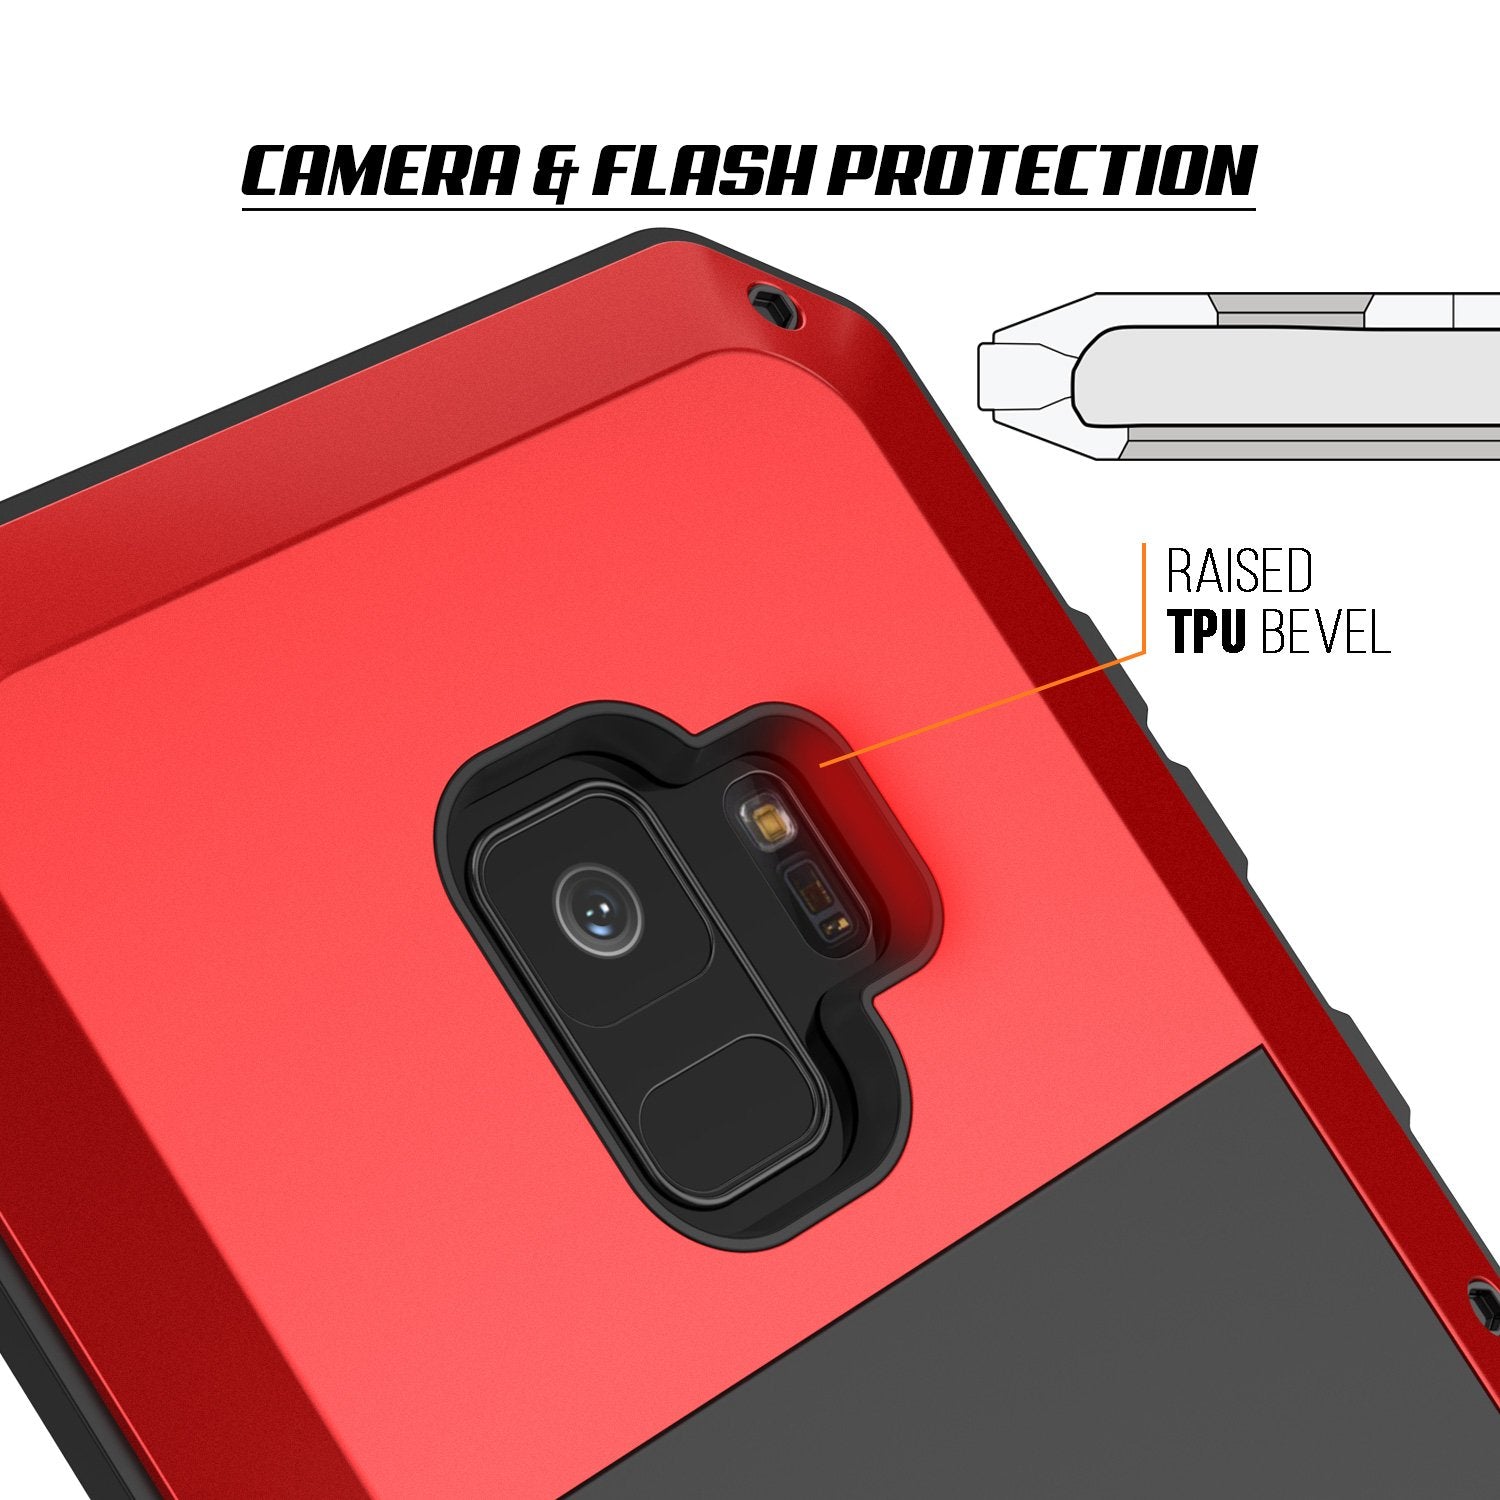 Galaxy S9 Metal Case, Heavy Duty Military Grade Rugged case [Red]